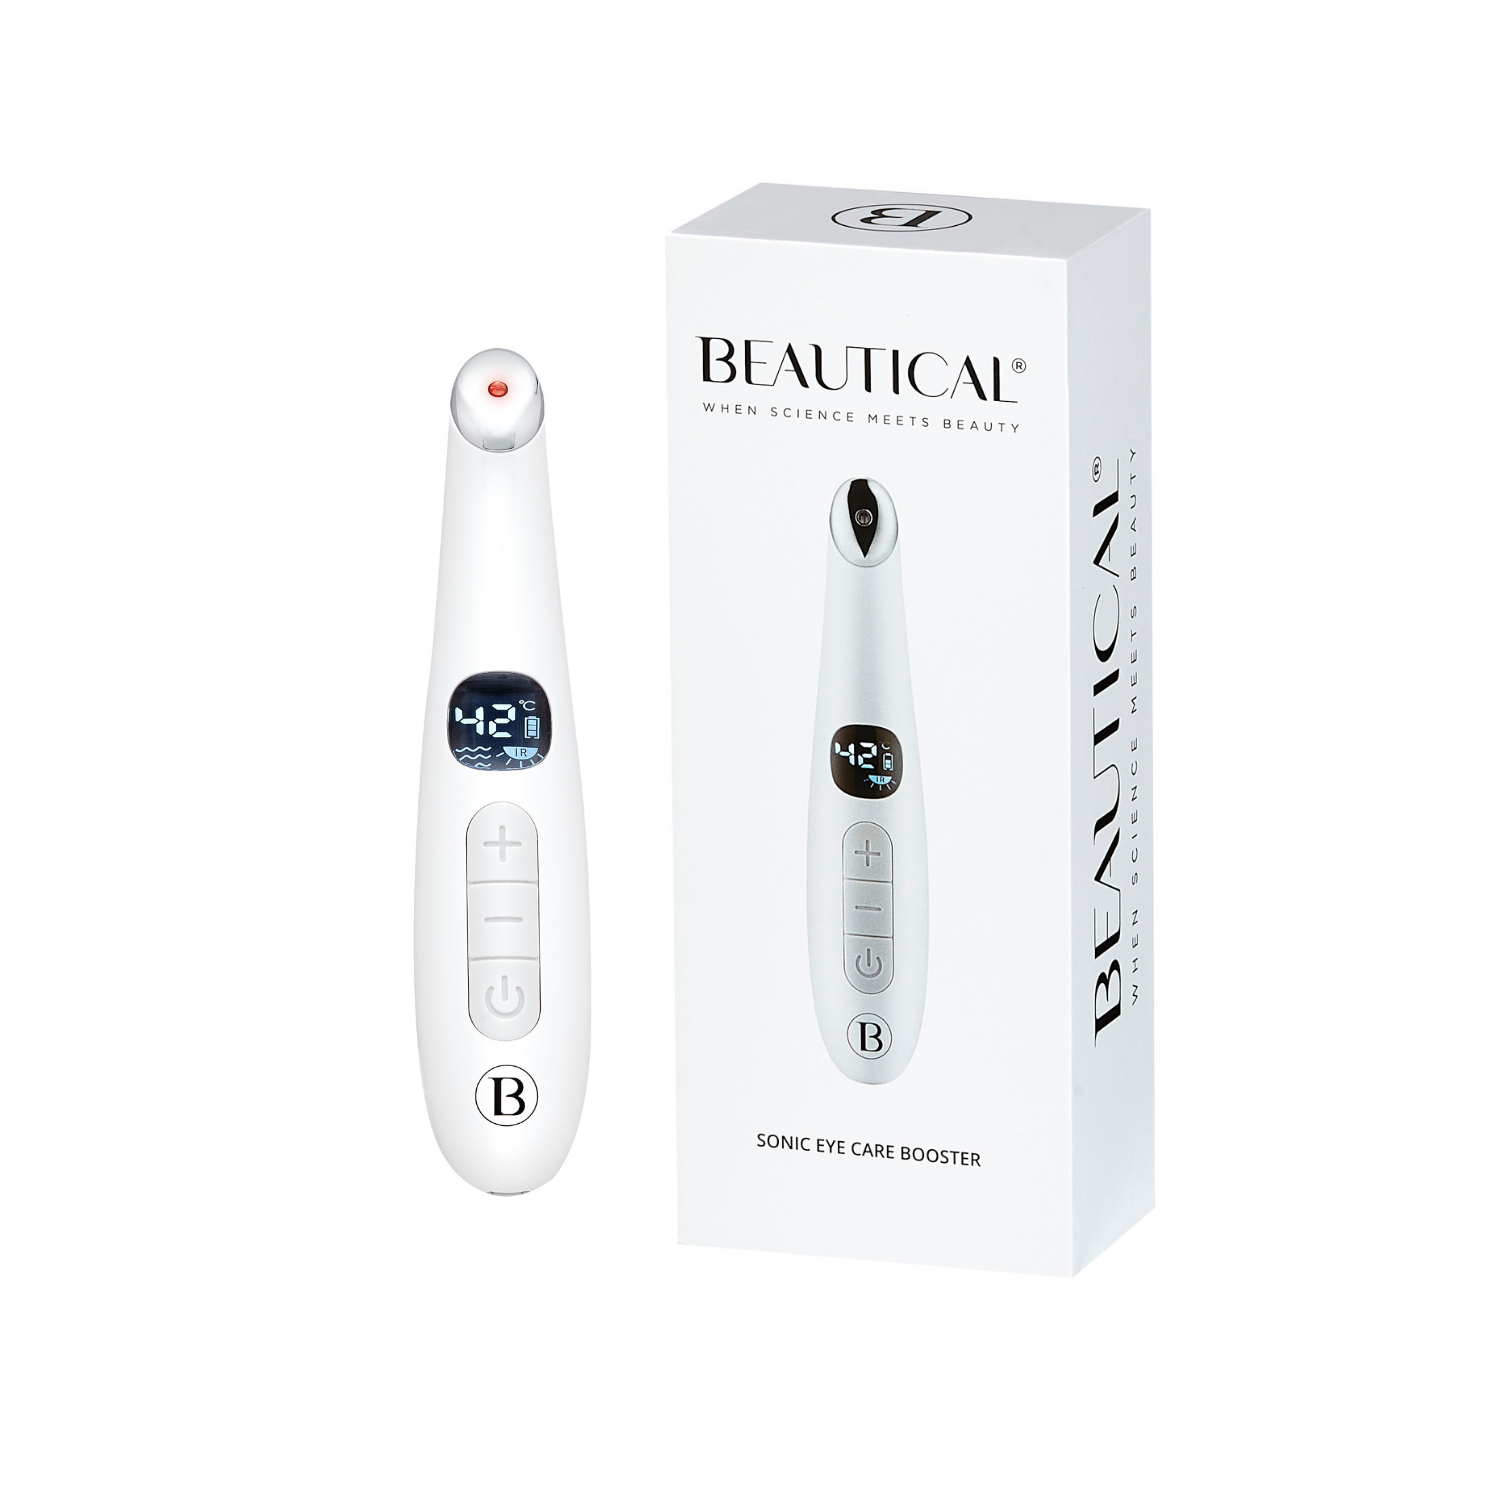 BEAUTICAL Sonic Eye Care Booster